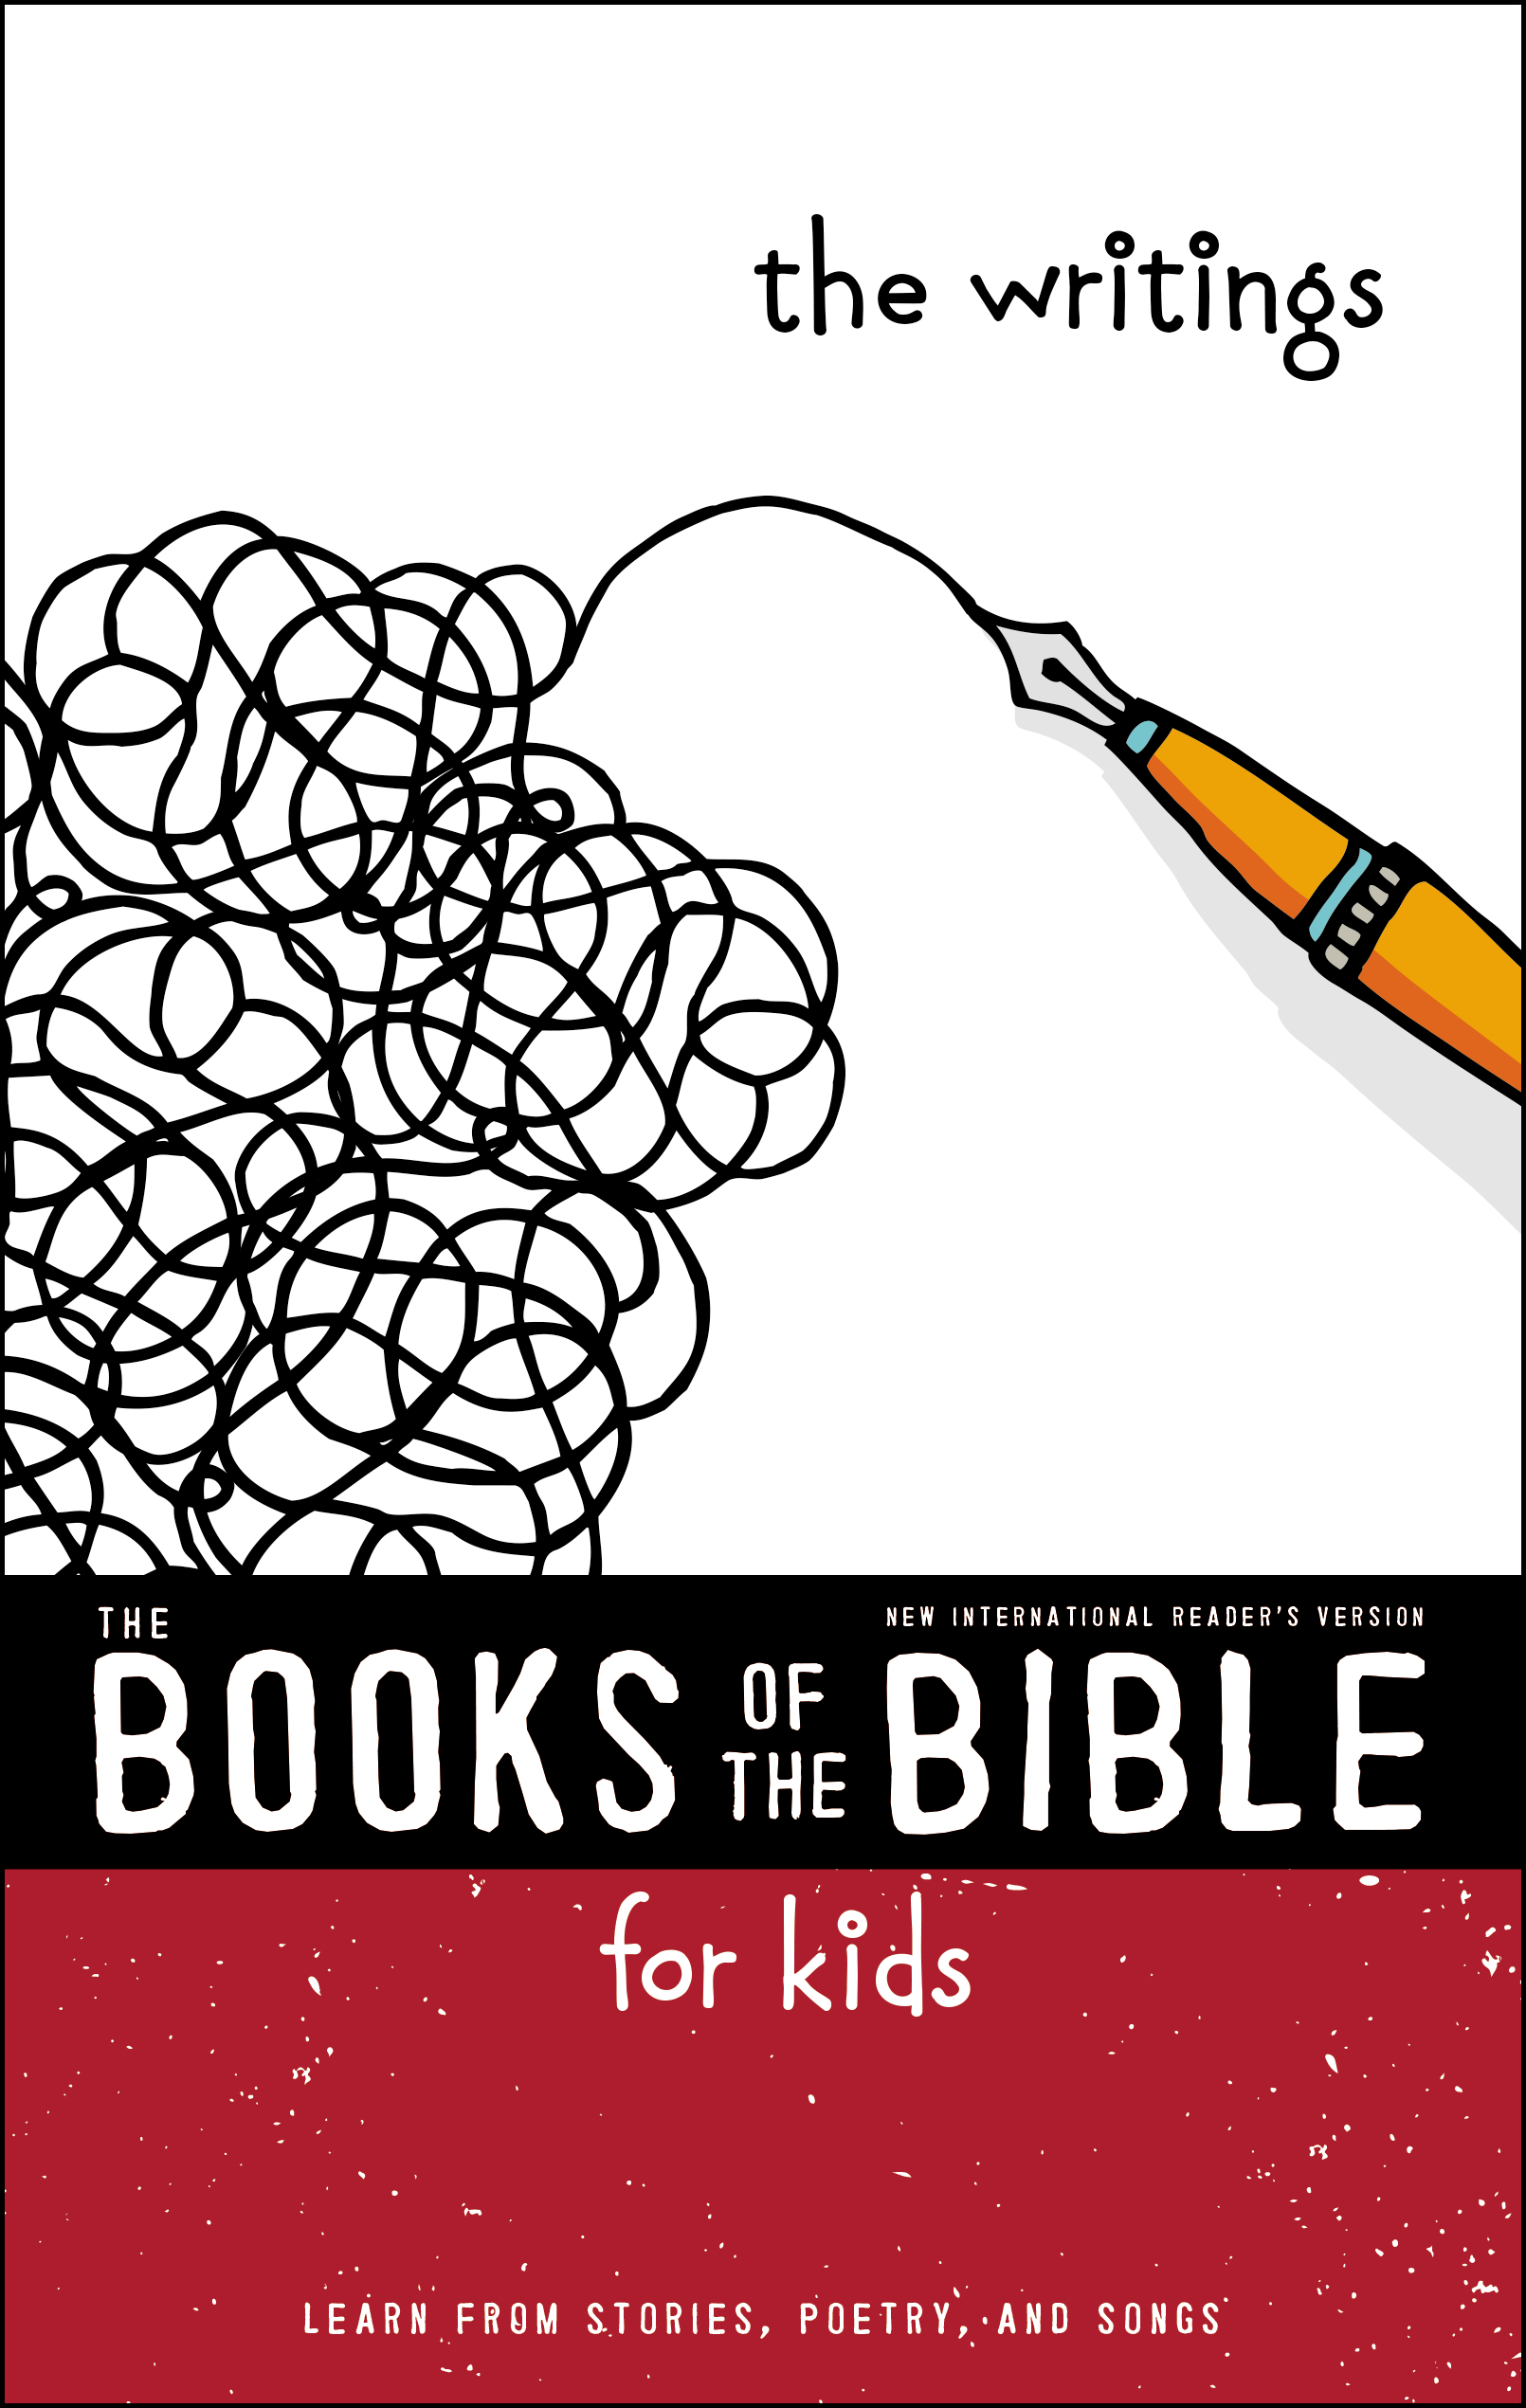 Books of the Bible: The Writings